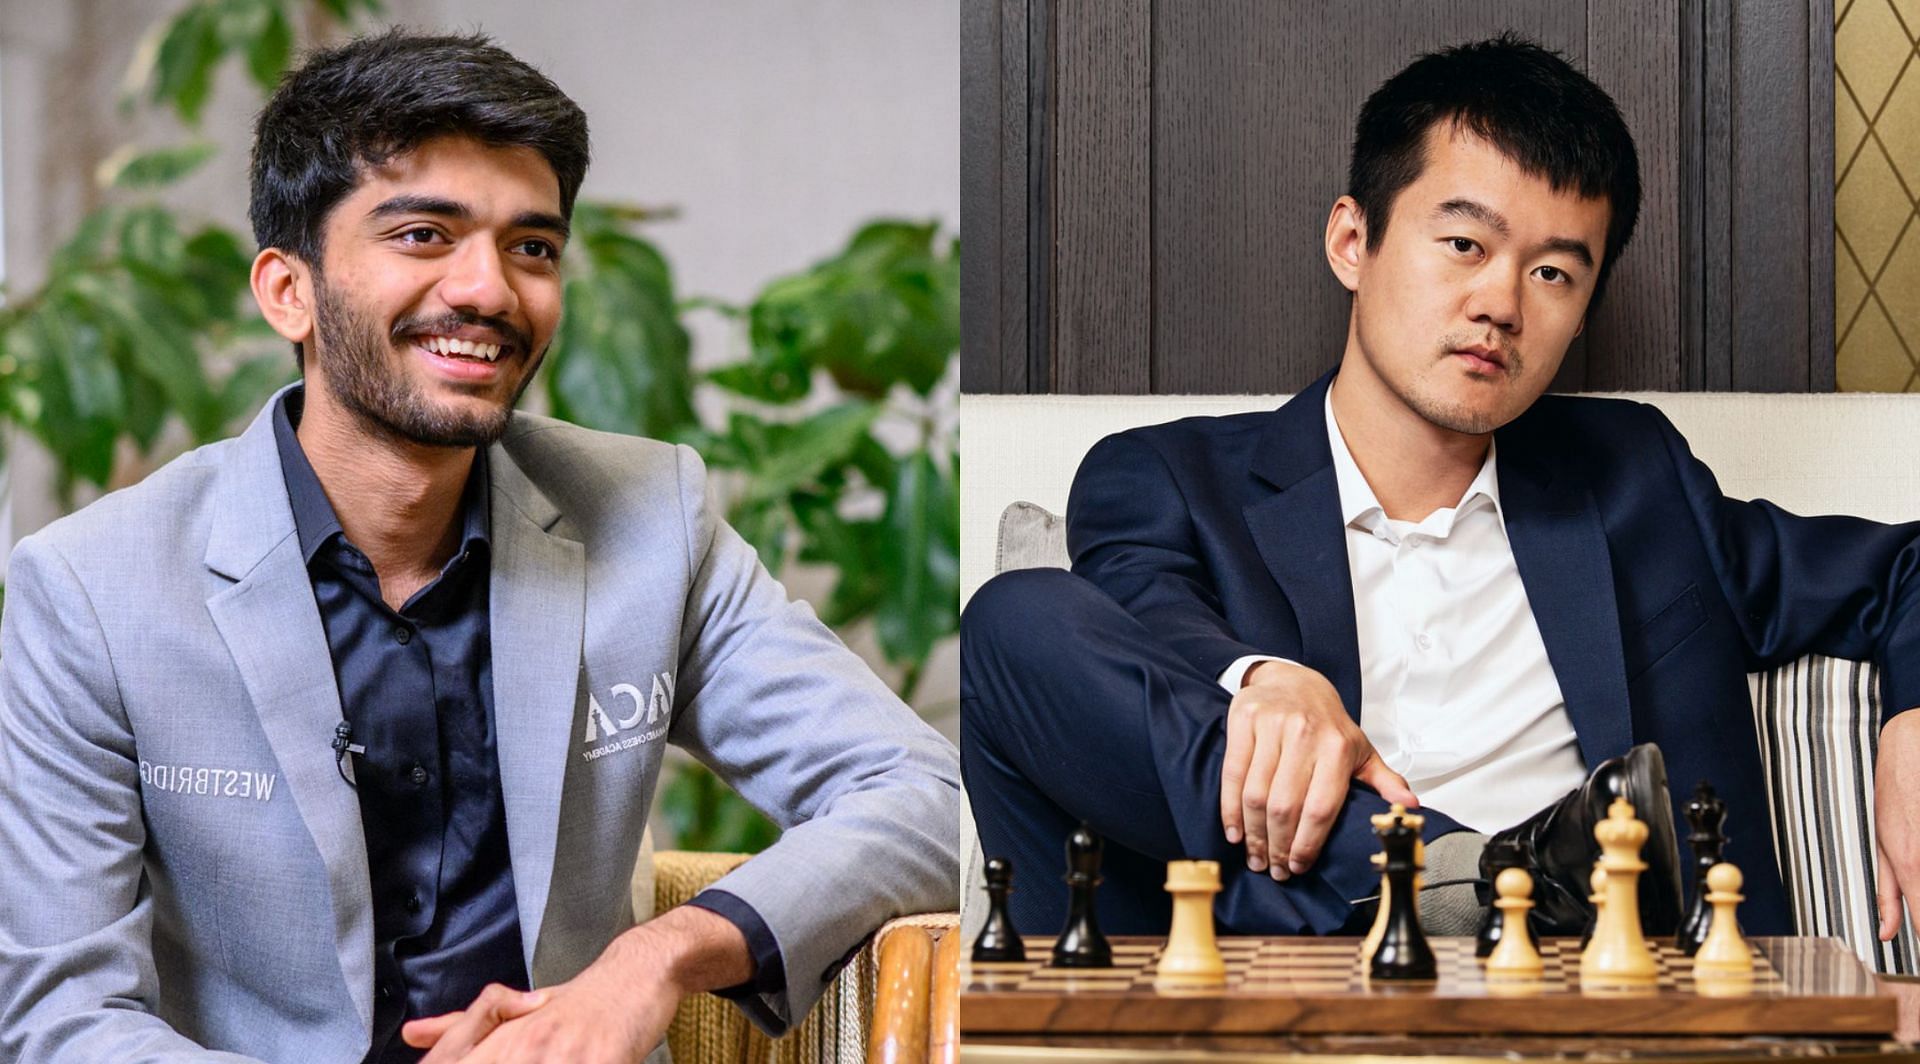 Gukesh D and Ding Liren will lock horns in the much-awaited clash. (Credit: FIDE/X)